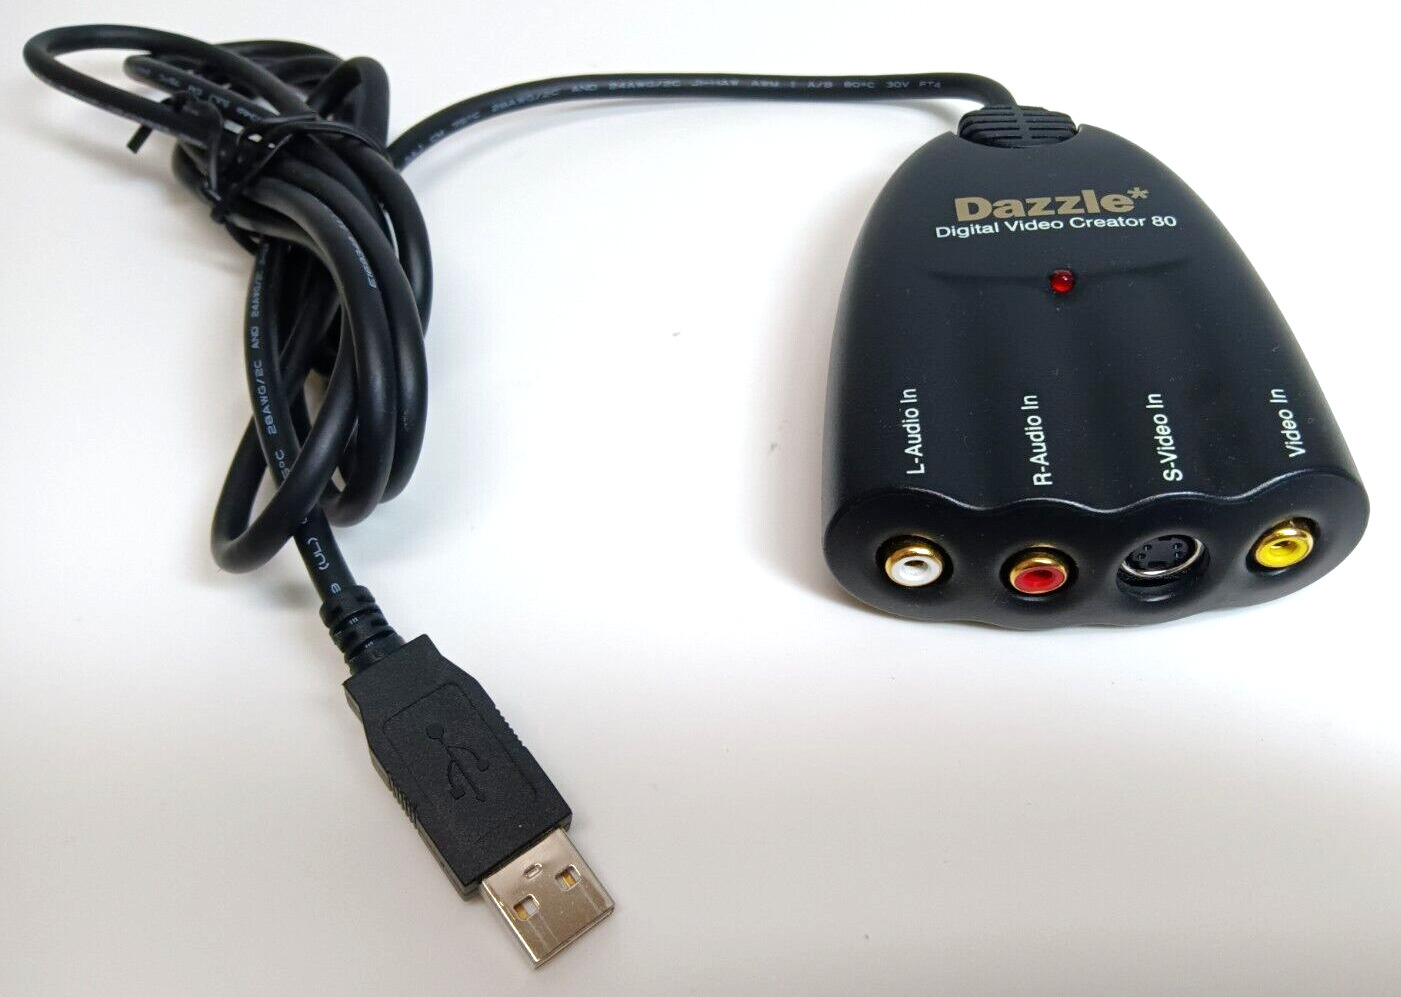 Pinnacle Systems Dazzle DVC 80 USB Video Capture Device